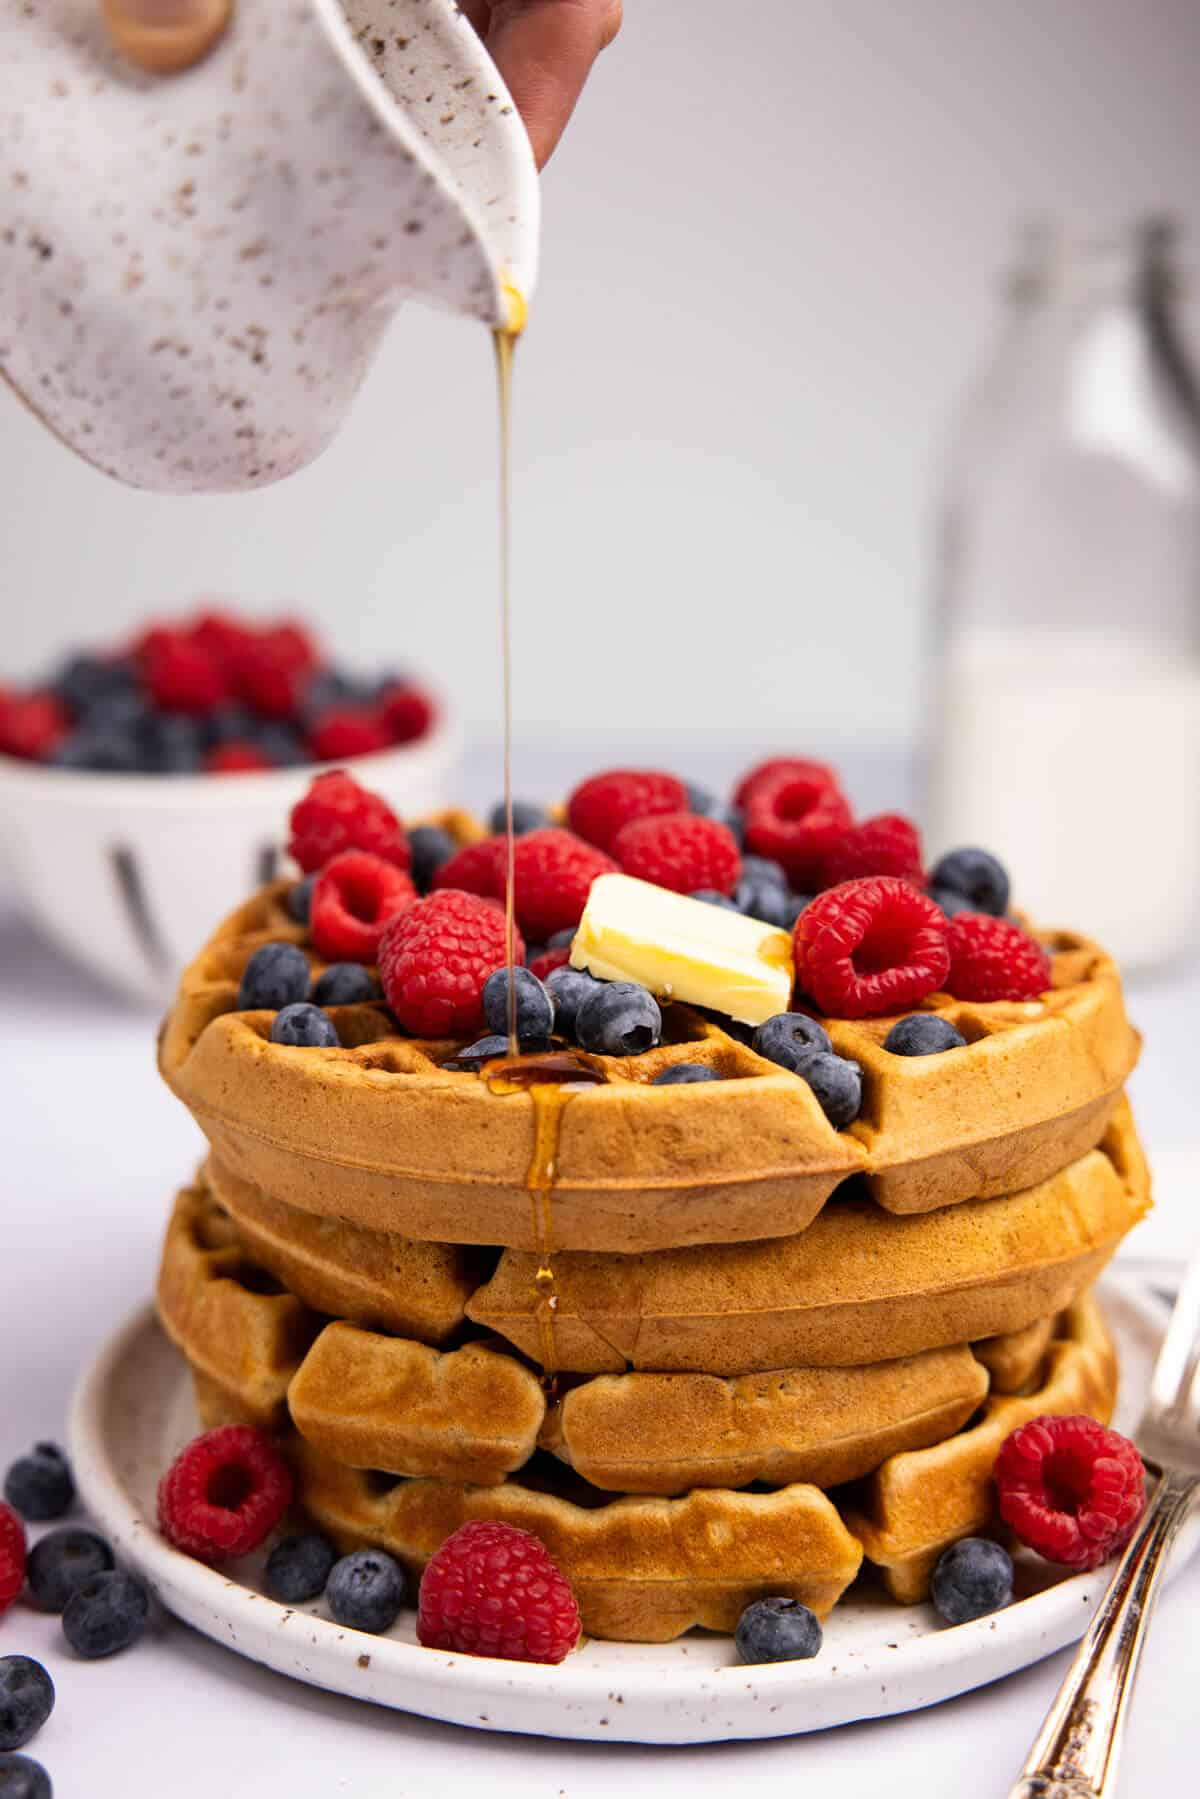 A stack of waffles with a pat of butter, berries, and maple syrup being drizzled over the top.